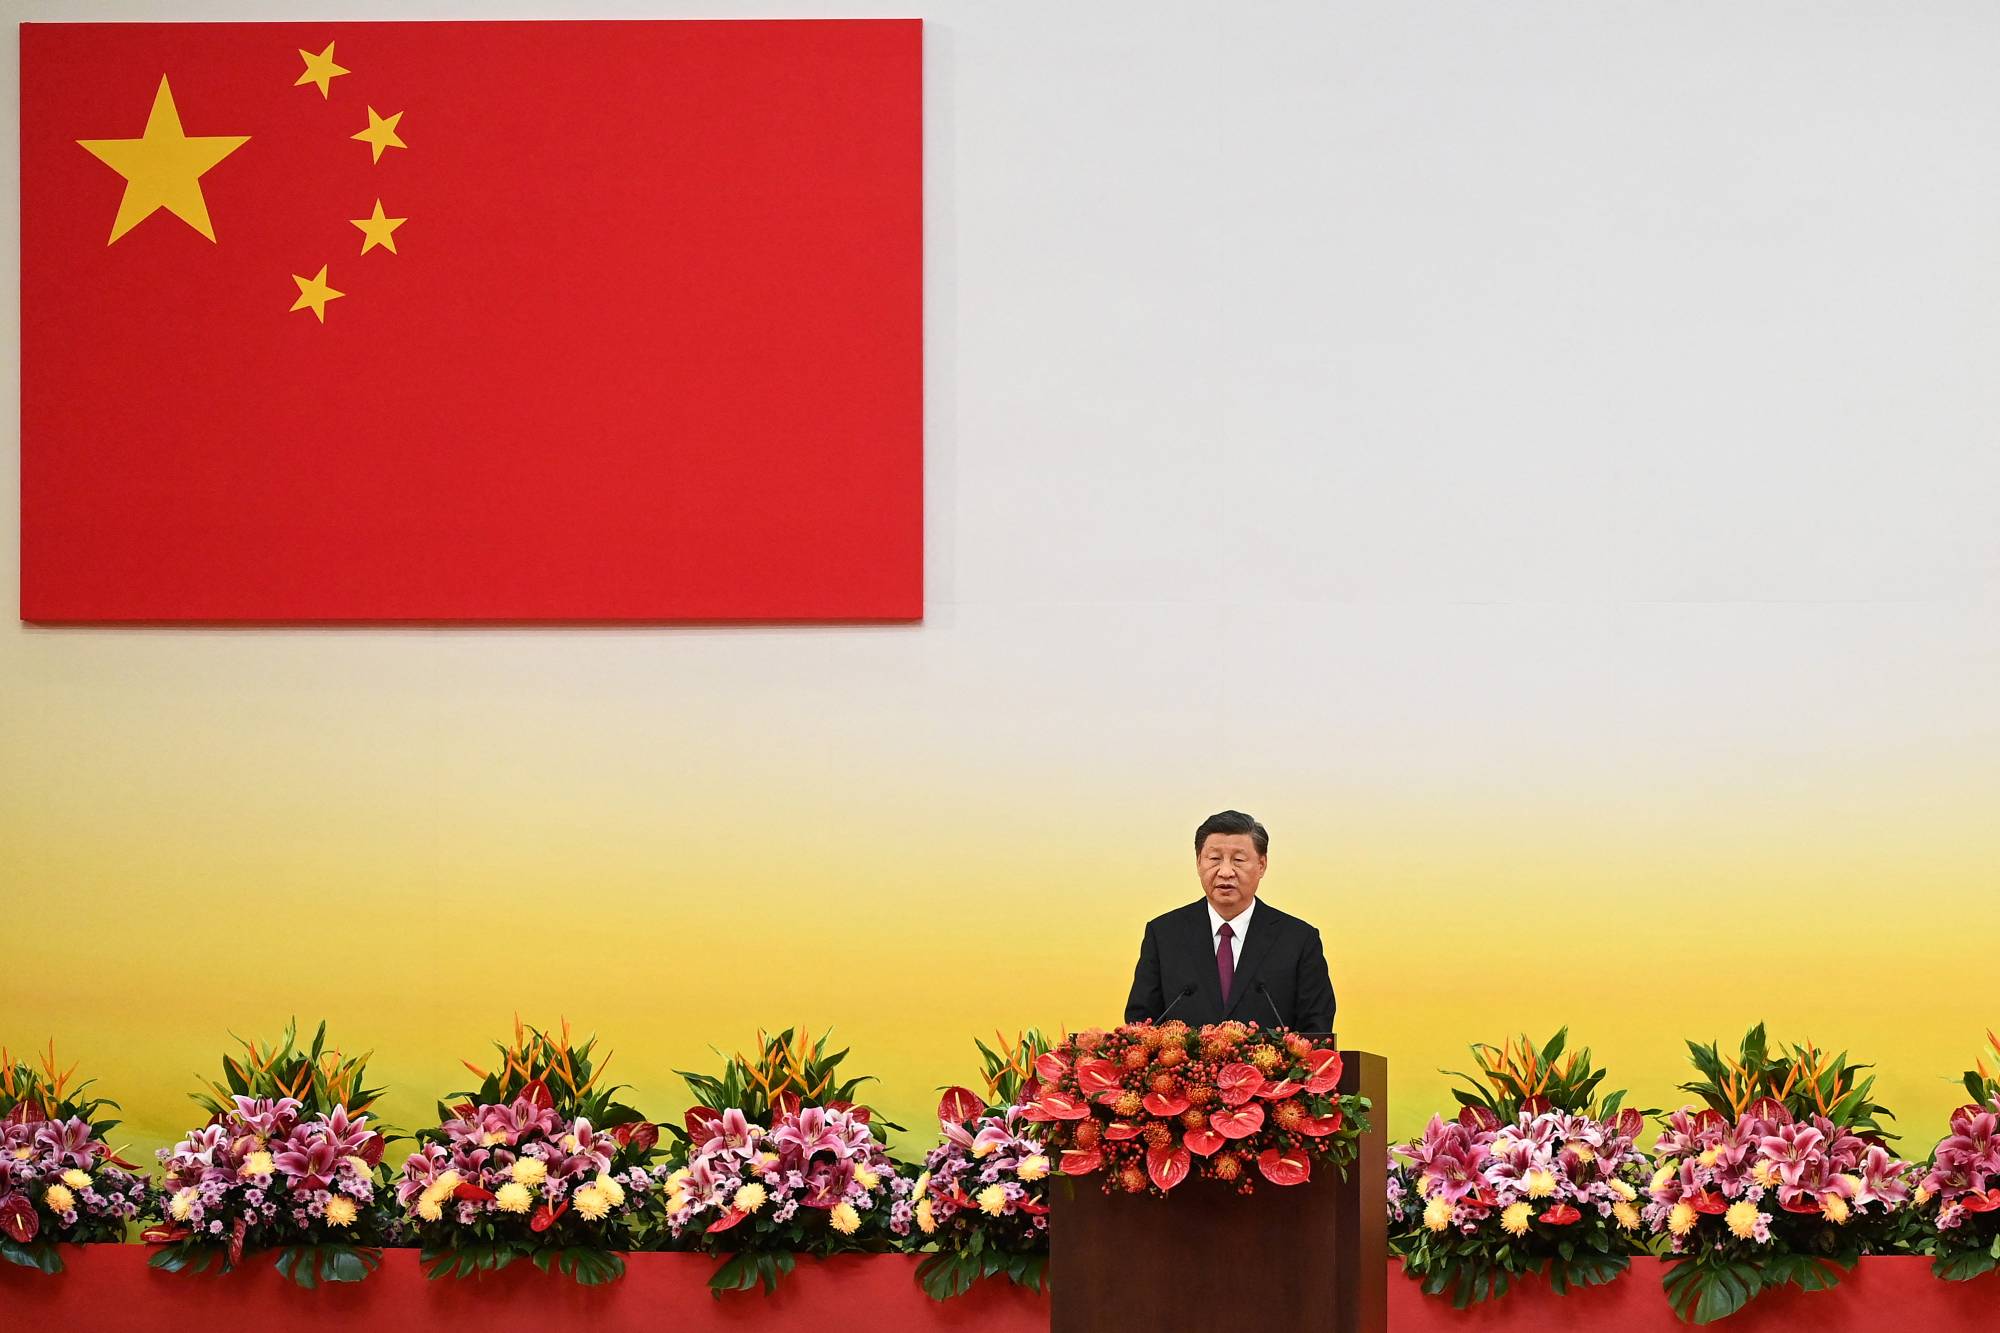 Chinese President Xi Jinping gives a speech at the swearing-in ceremony of Hong Kong's new leader and government in the city on July 1 — the 25th anniversary of Hong Kong's handover from Britain.  | POOL / VIA REUTERS